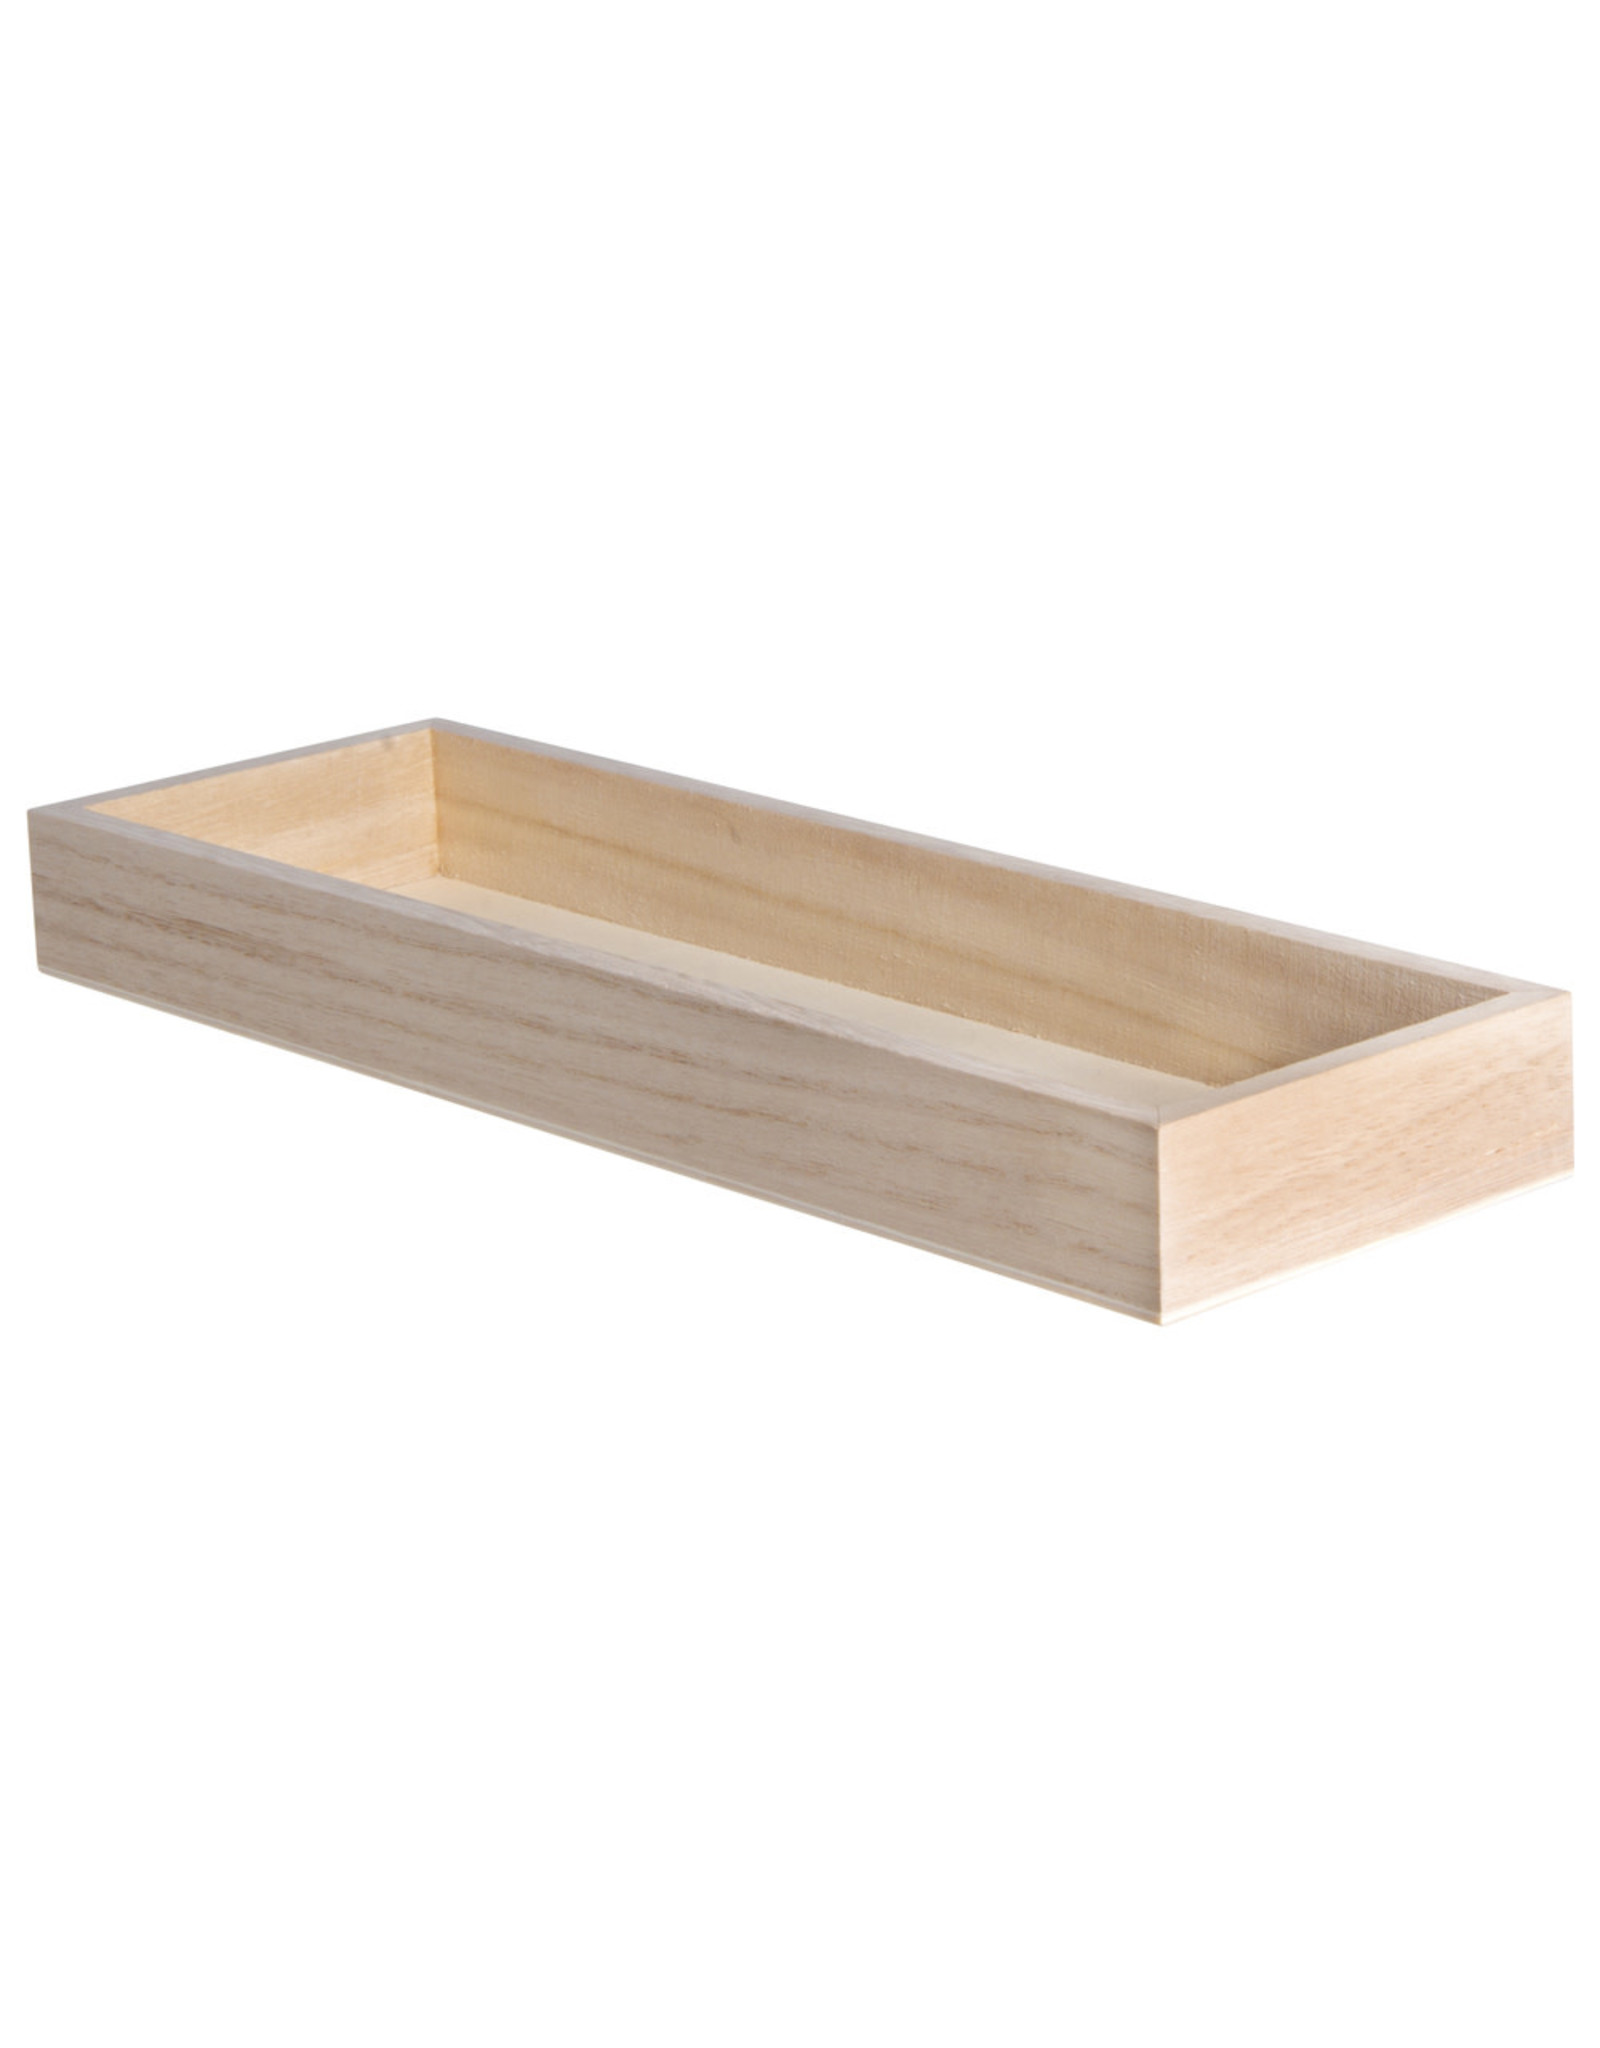 Plateau bois Madera rectangulaire made in France